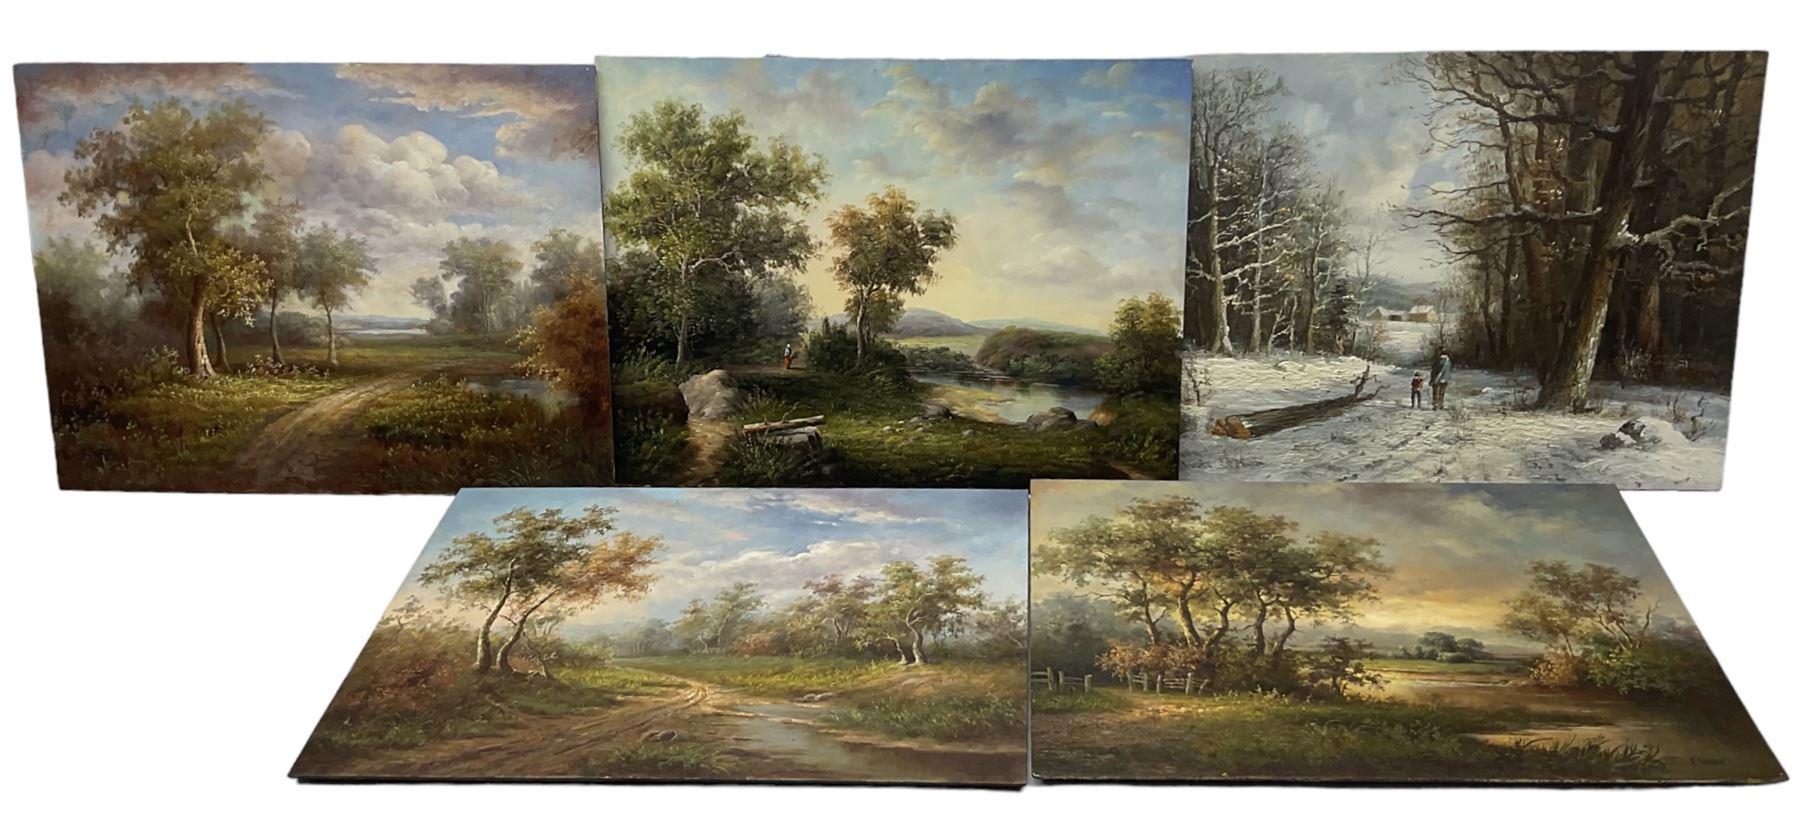 Collection of continental style oils on panel with landscape and street scenes - Image 3 of 3